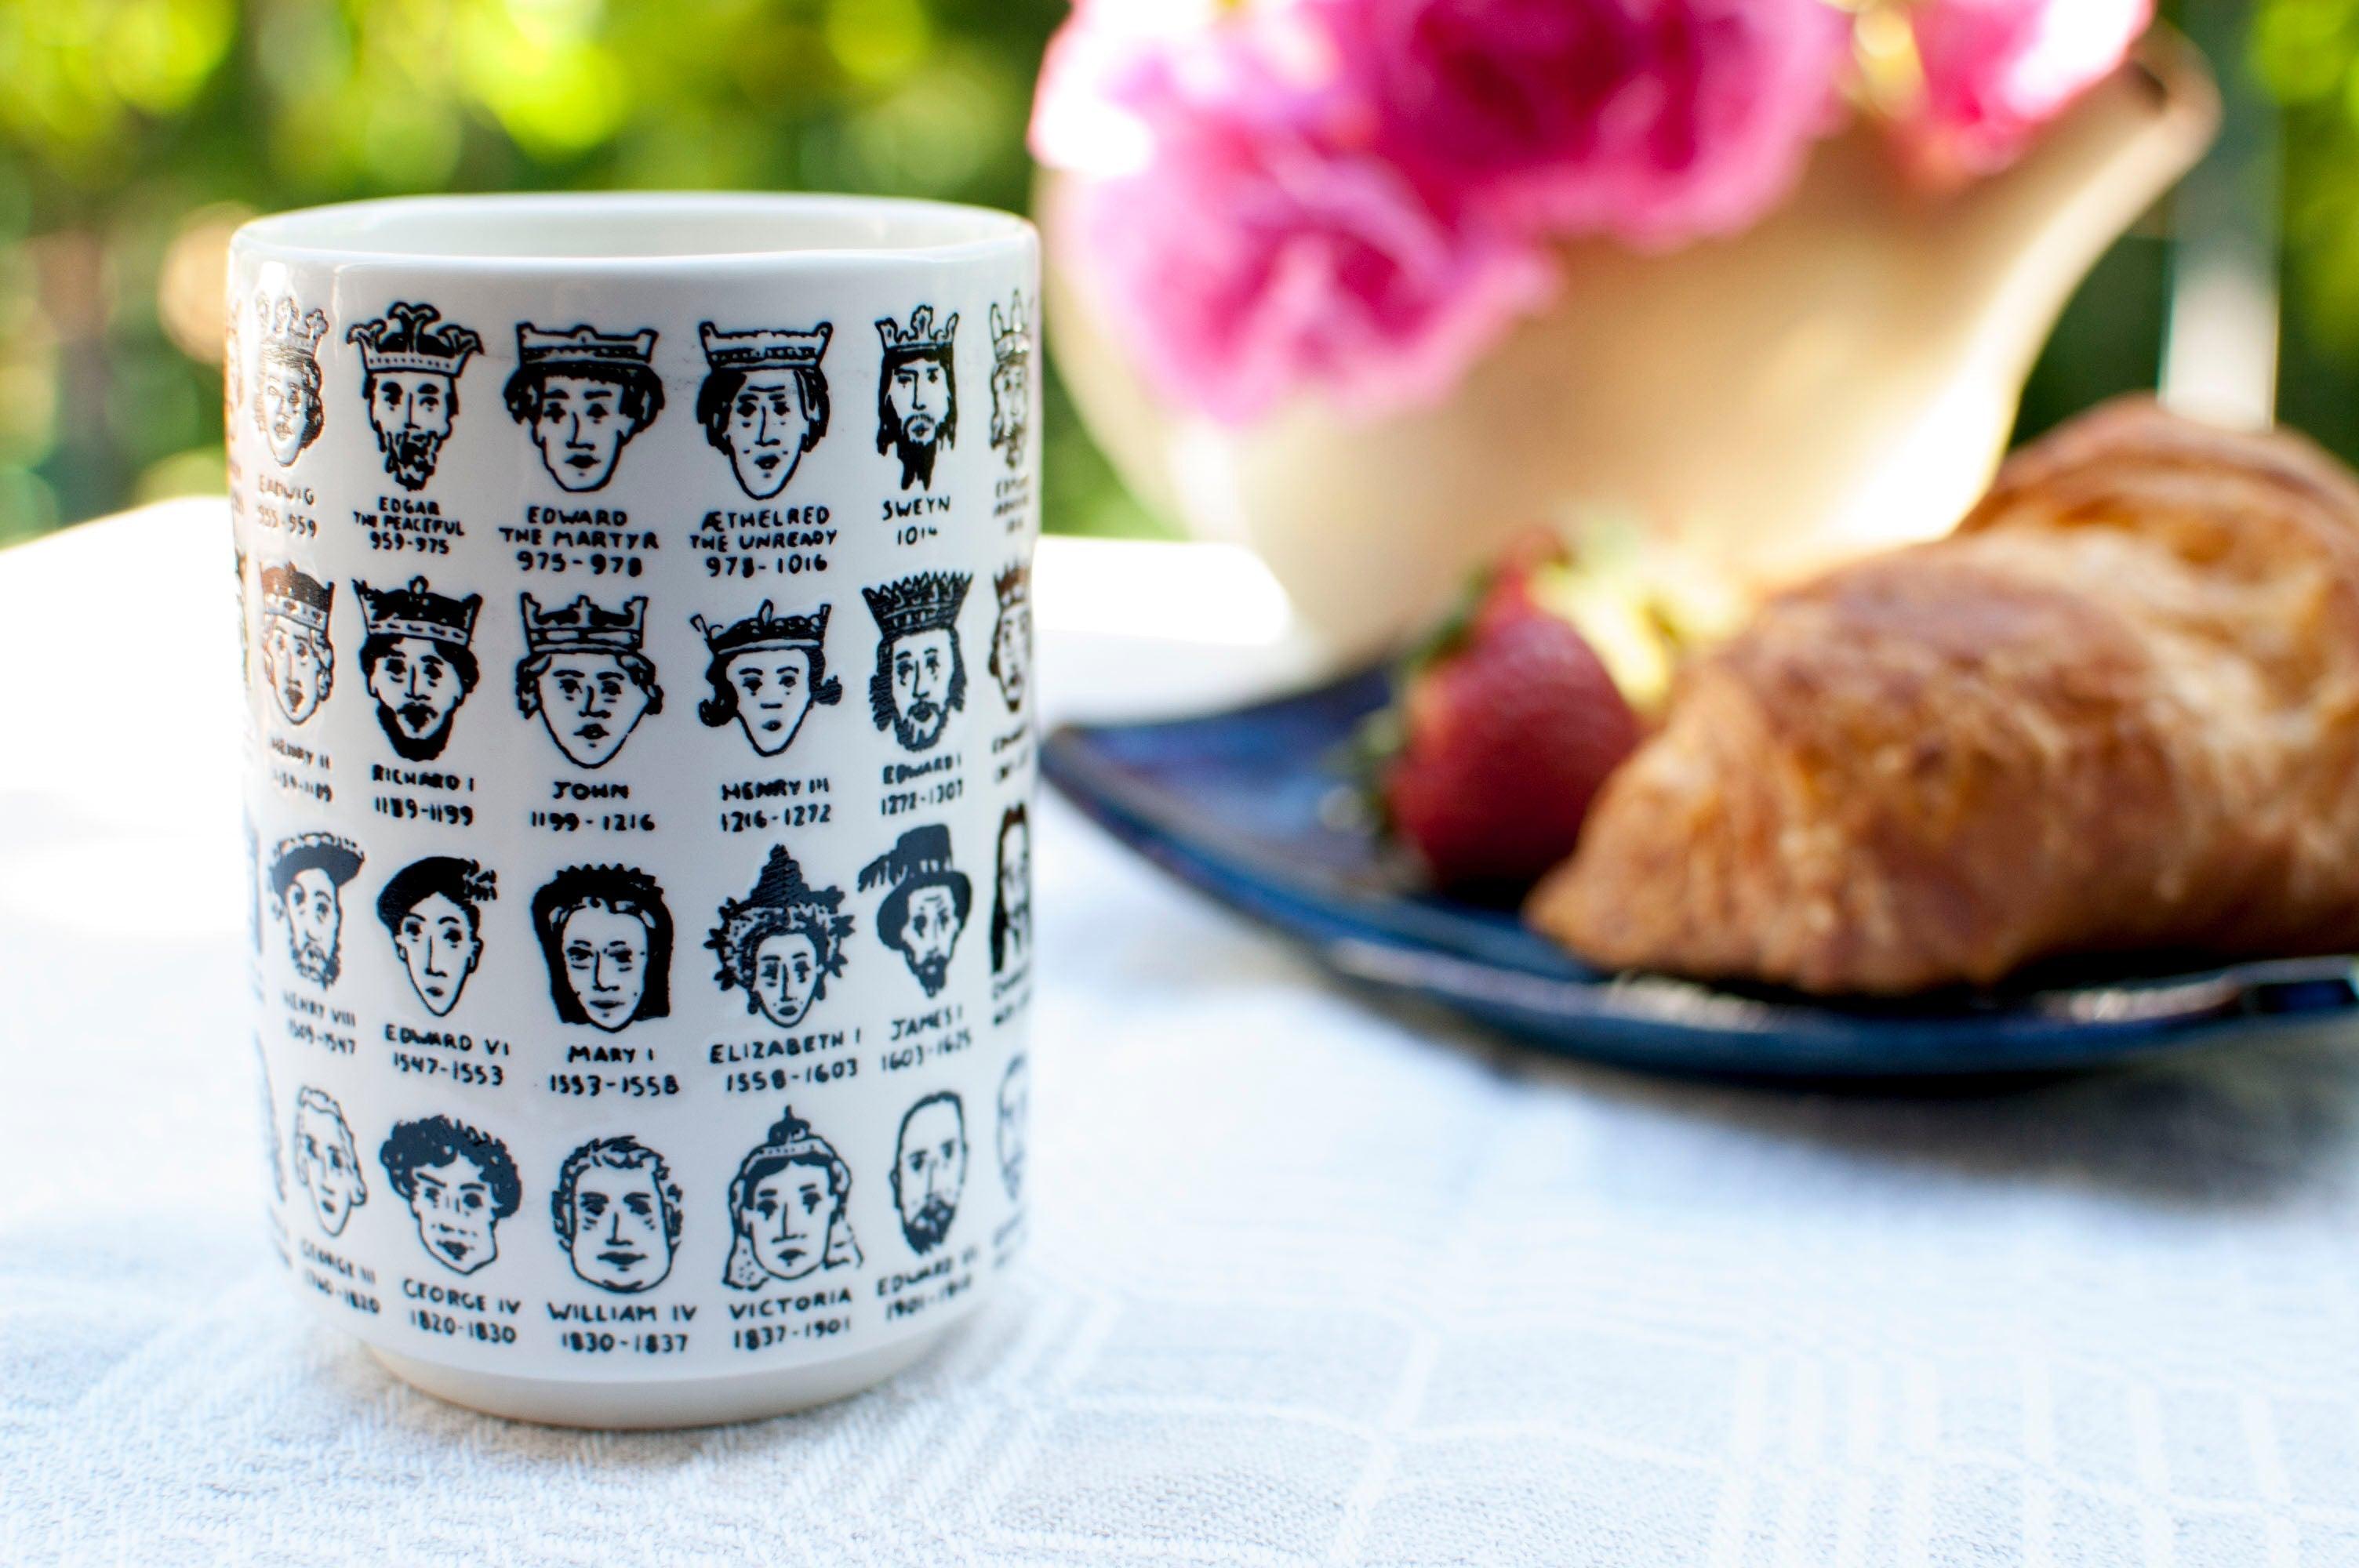 Product photo of English Royalty Cup, a novelty gift manufactured by The Unemployed Philosophers Guild.